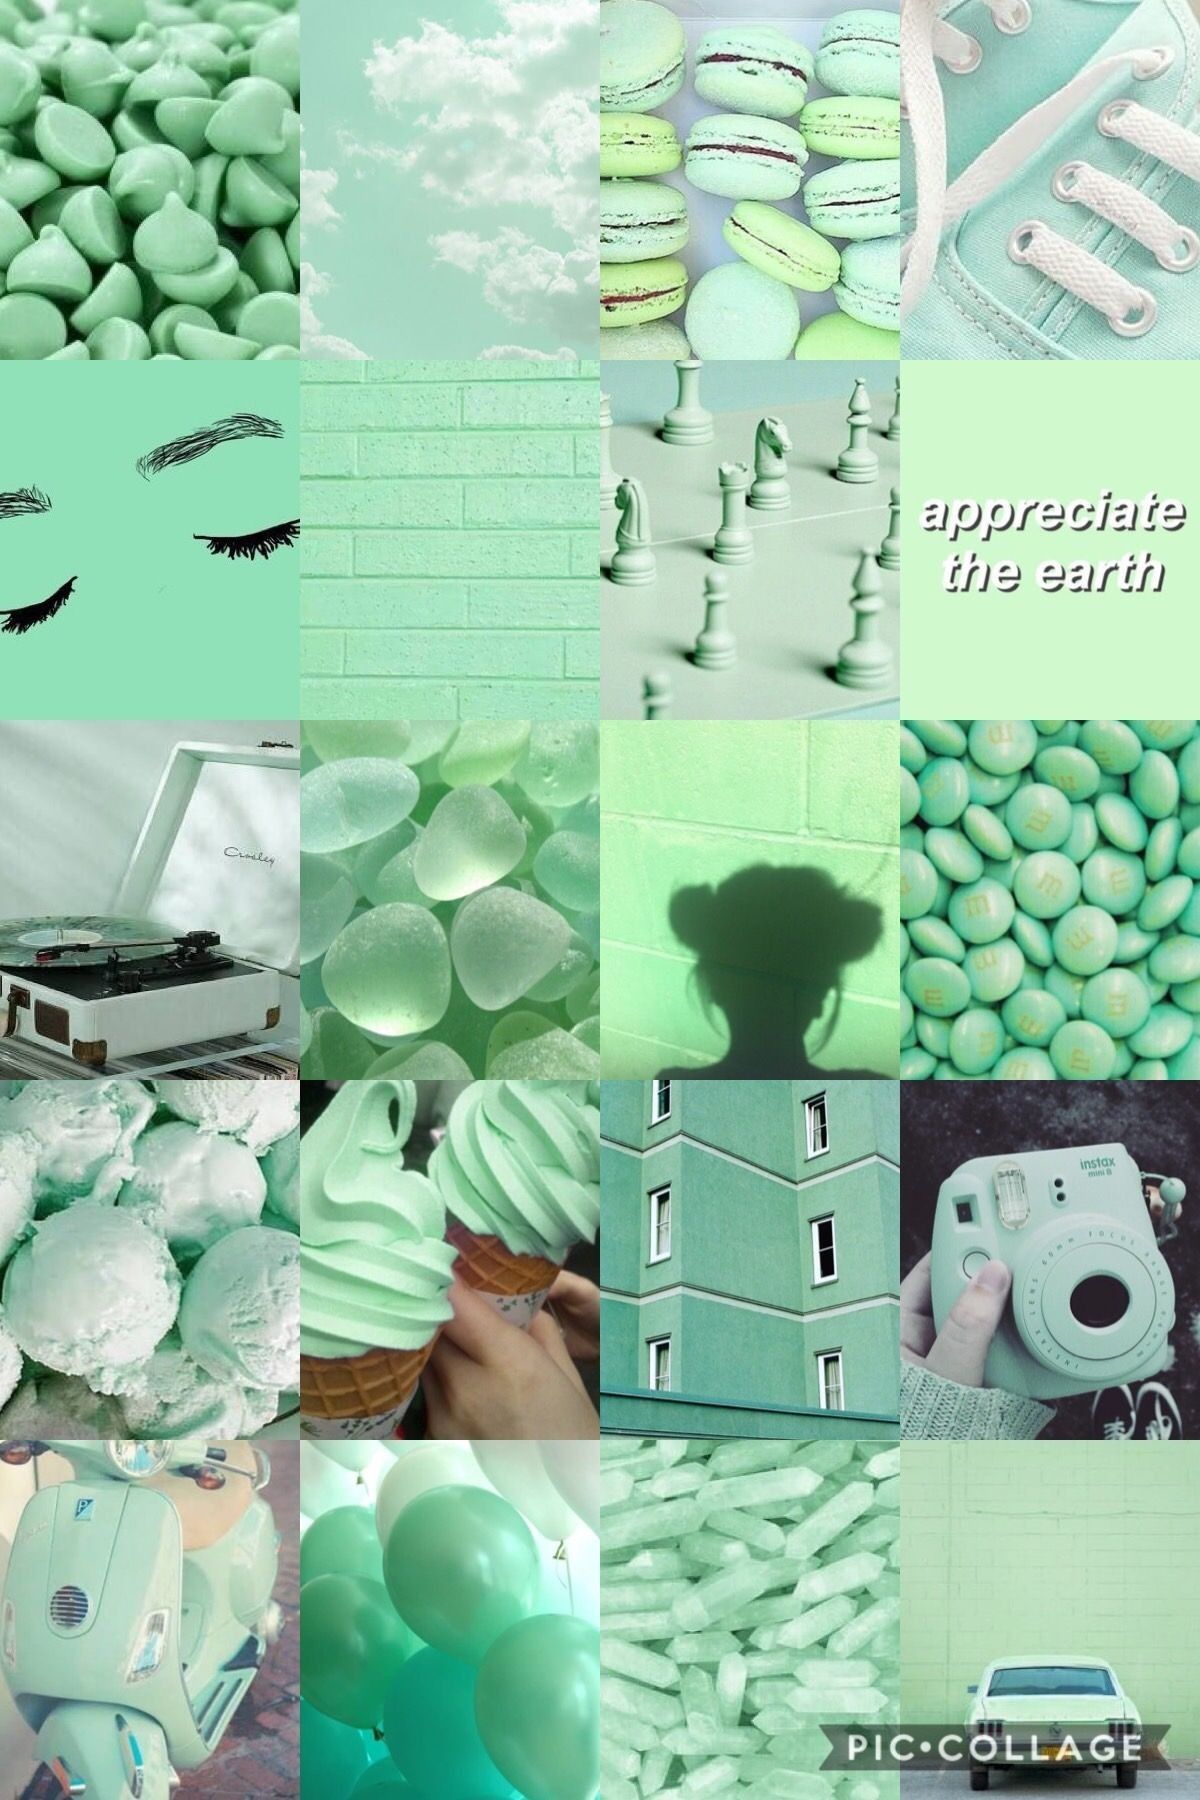 Iphone Wallpaper Pastel Green Images  Free Photos PNG Stickers Wallpapers   Backgrounds  rawpixel